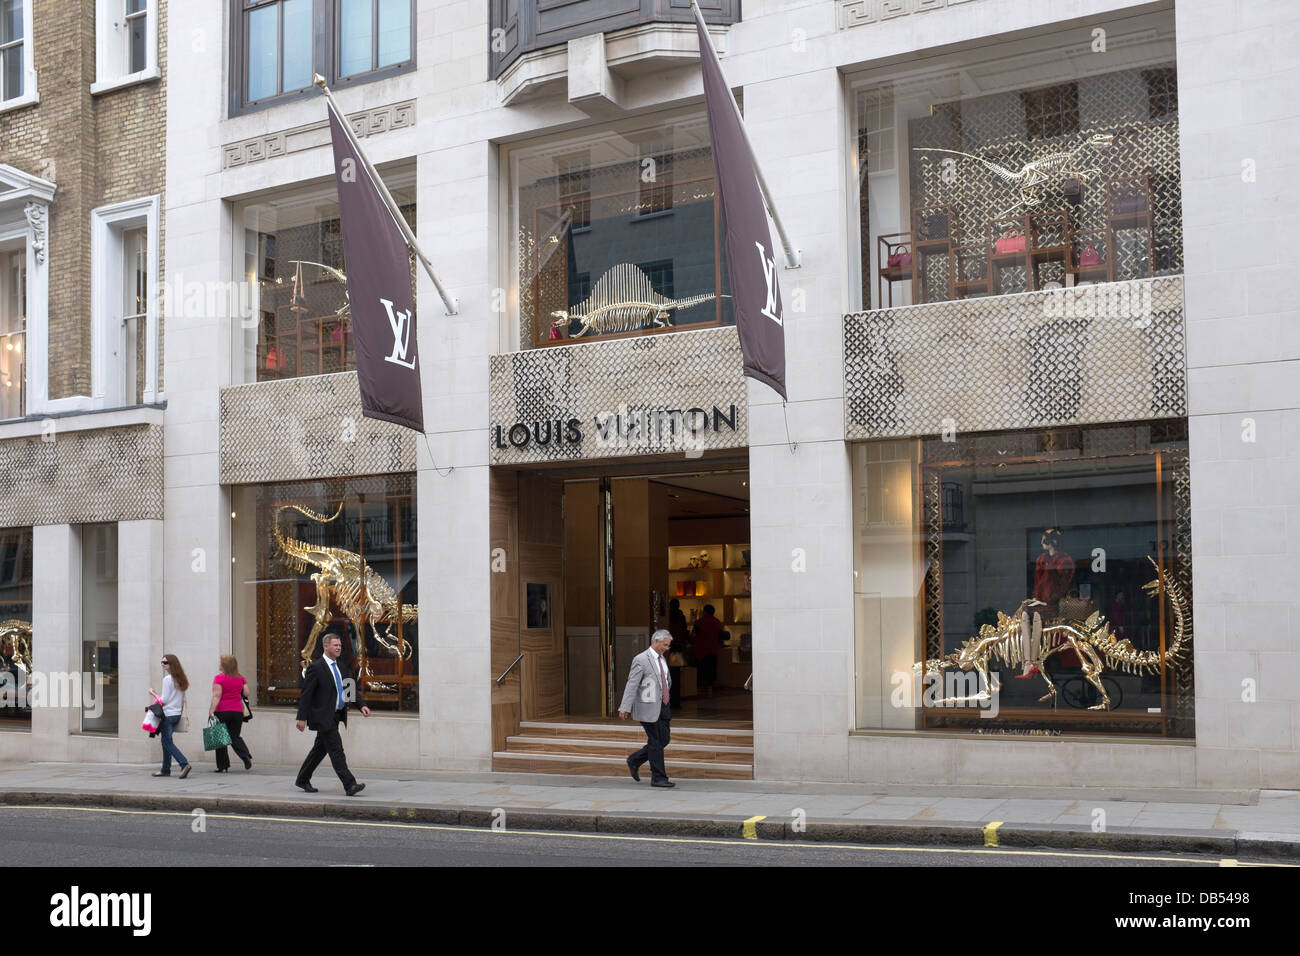 The Louis Vuitton sign above the store on New Bond Street, London, UK Stock  Photo - Alamy